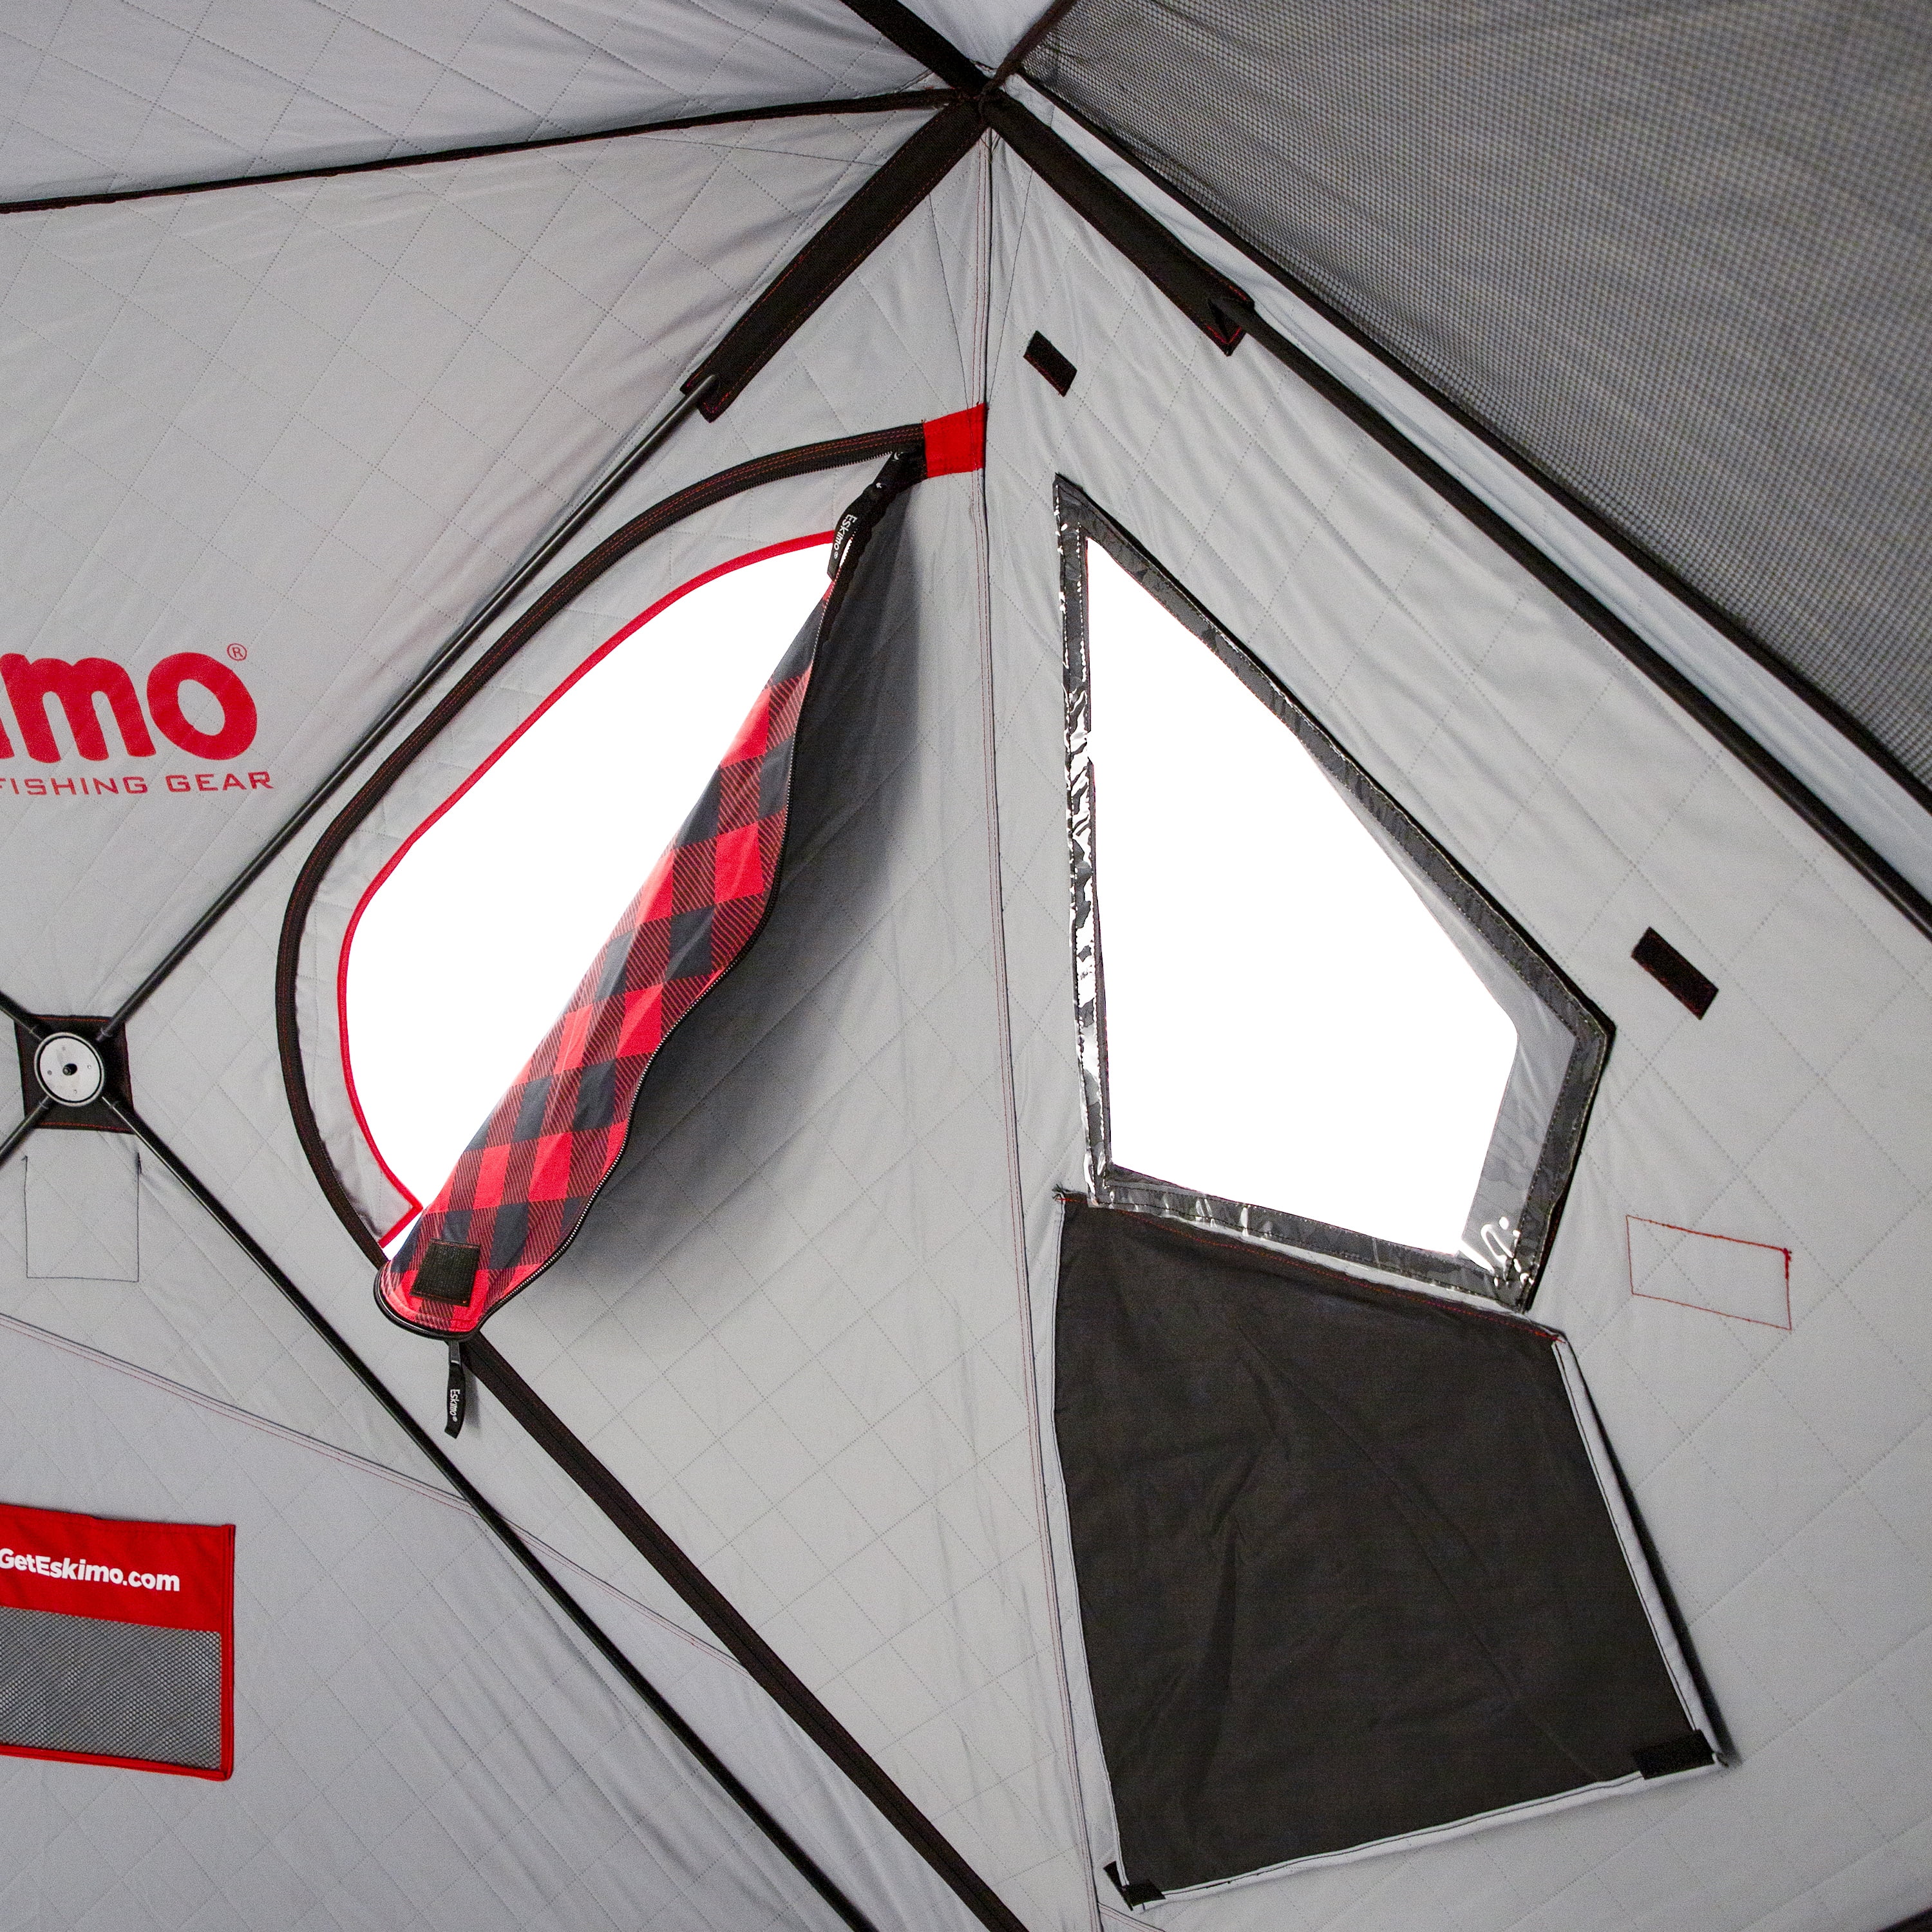 Eskimo Outbreak 350XD Limited Pop-up Portable Insulated Ice Fishing Shelter,  63 sq ft. Fishable Area, 3-4 Person, Red/Black, 126 x 126, Shelters -   Canada